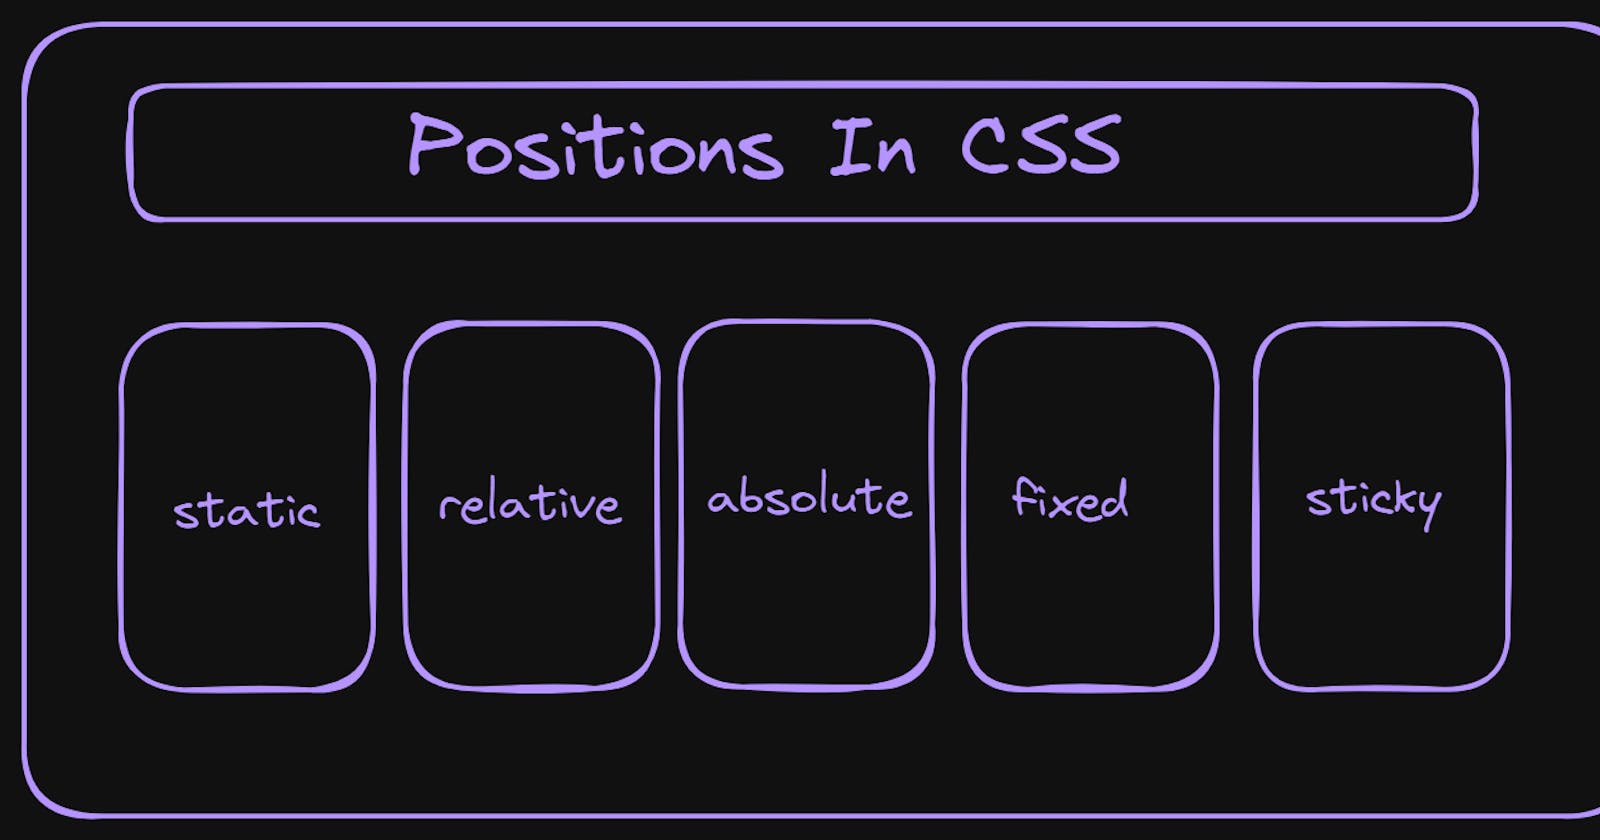 Positions In CSS